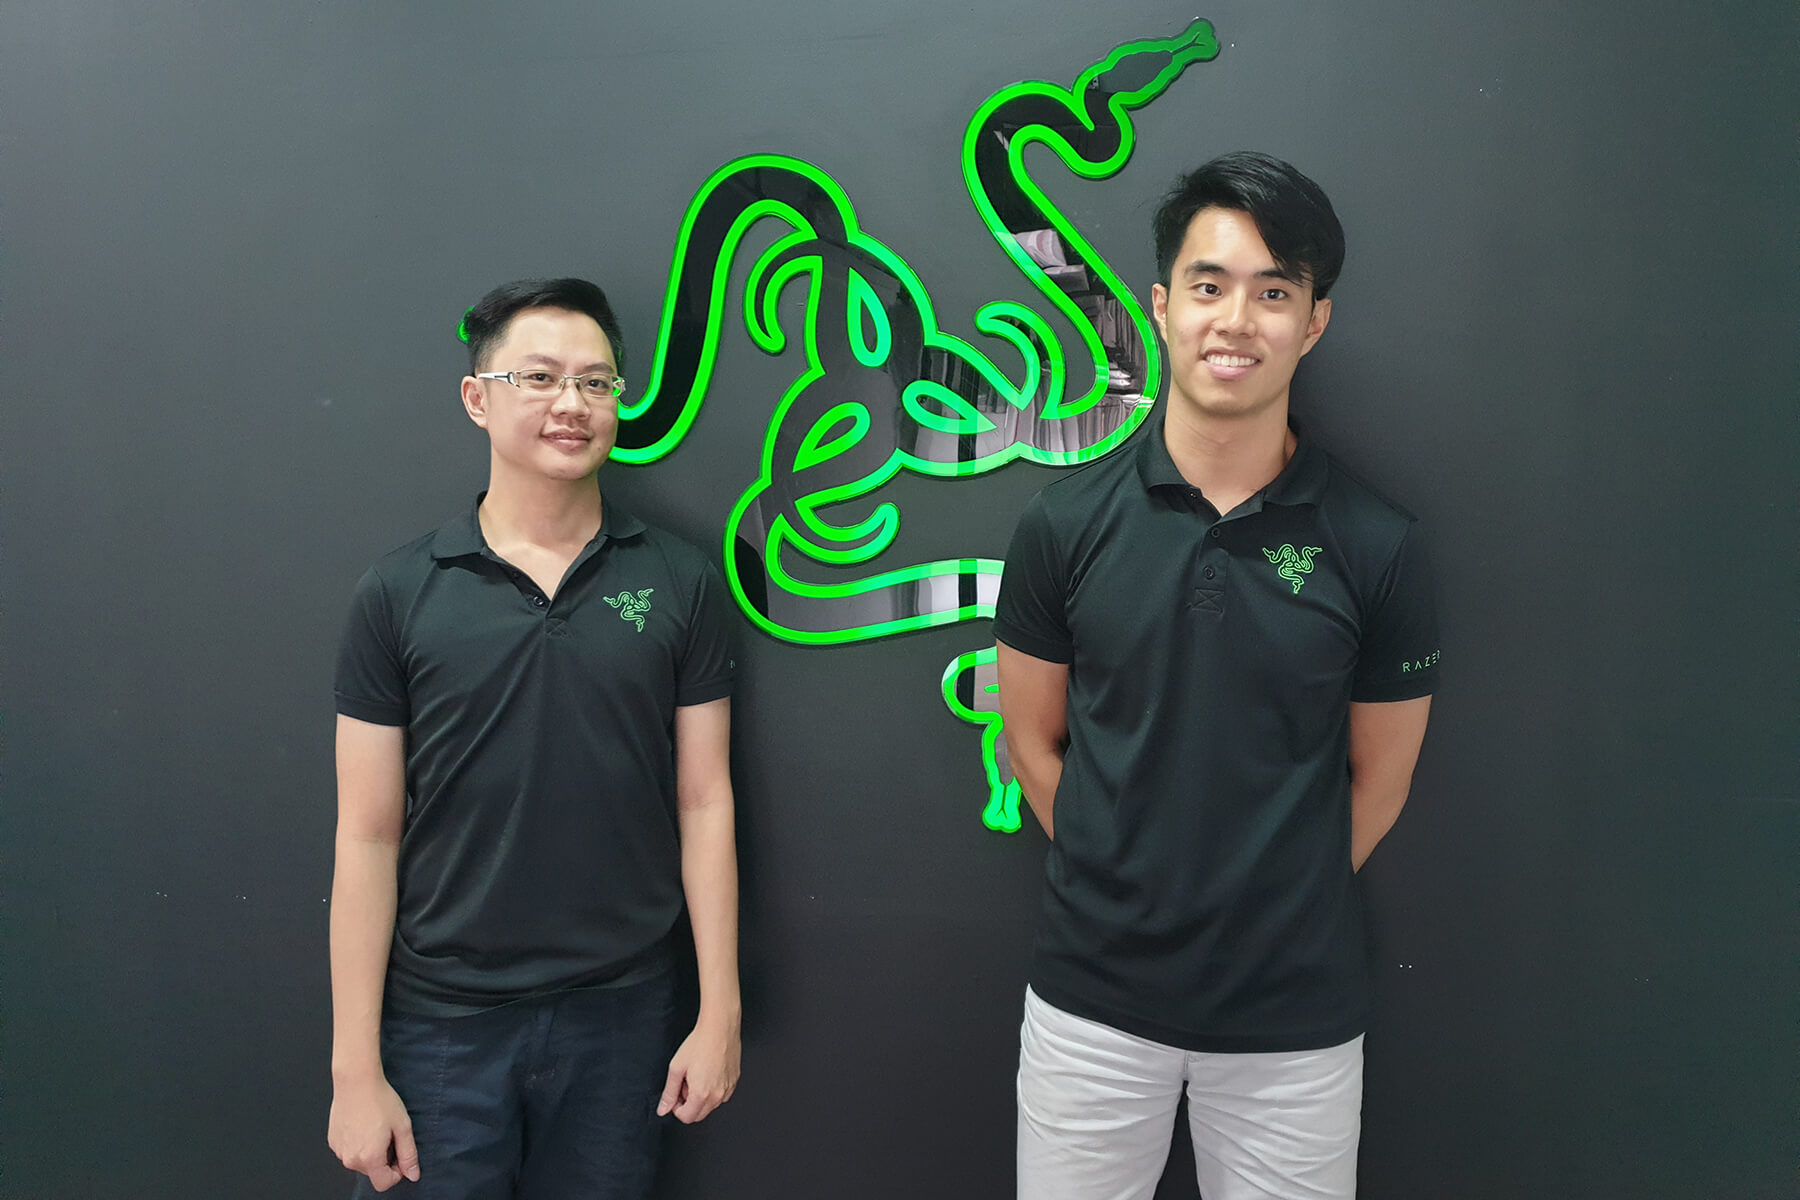 Two men wearing polo shirts with the green Razer logo stand by a gray wall, on either side of a much larger Razer logo.